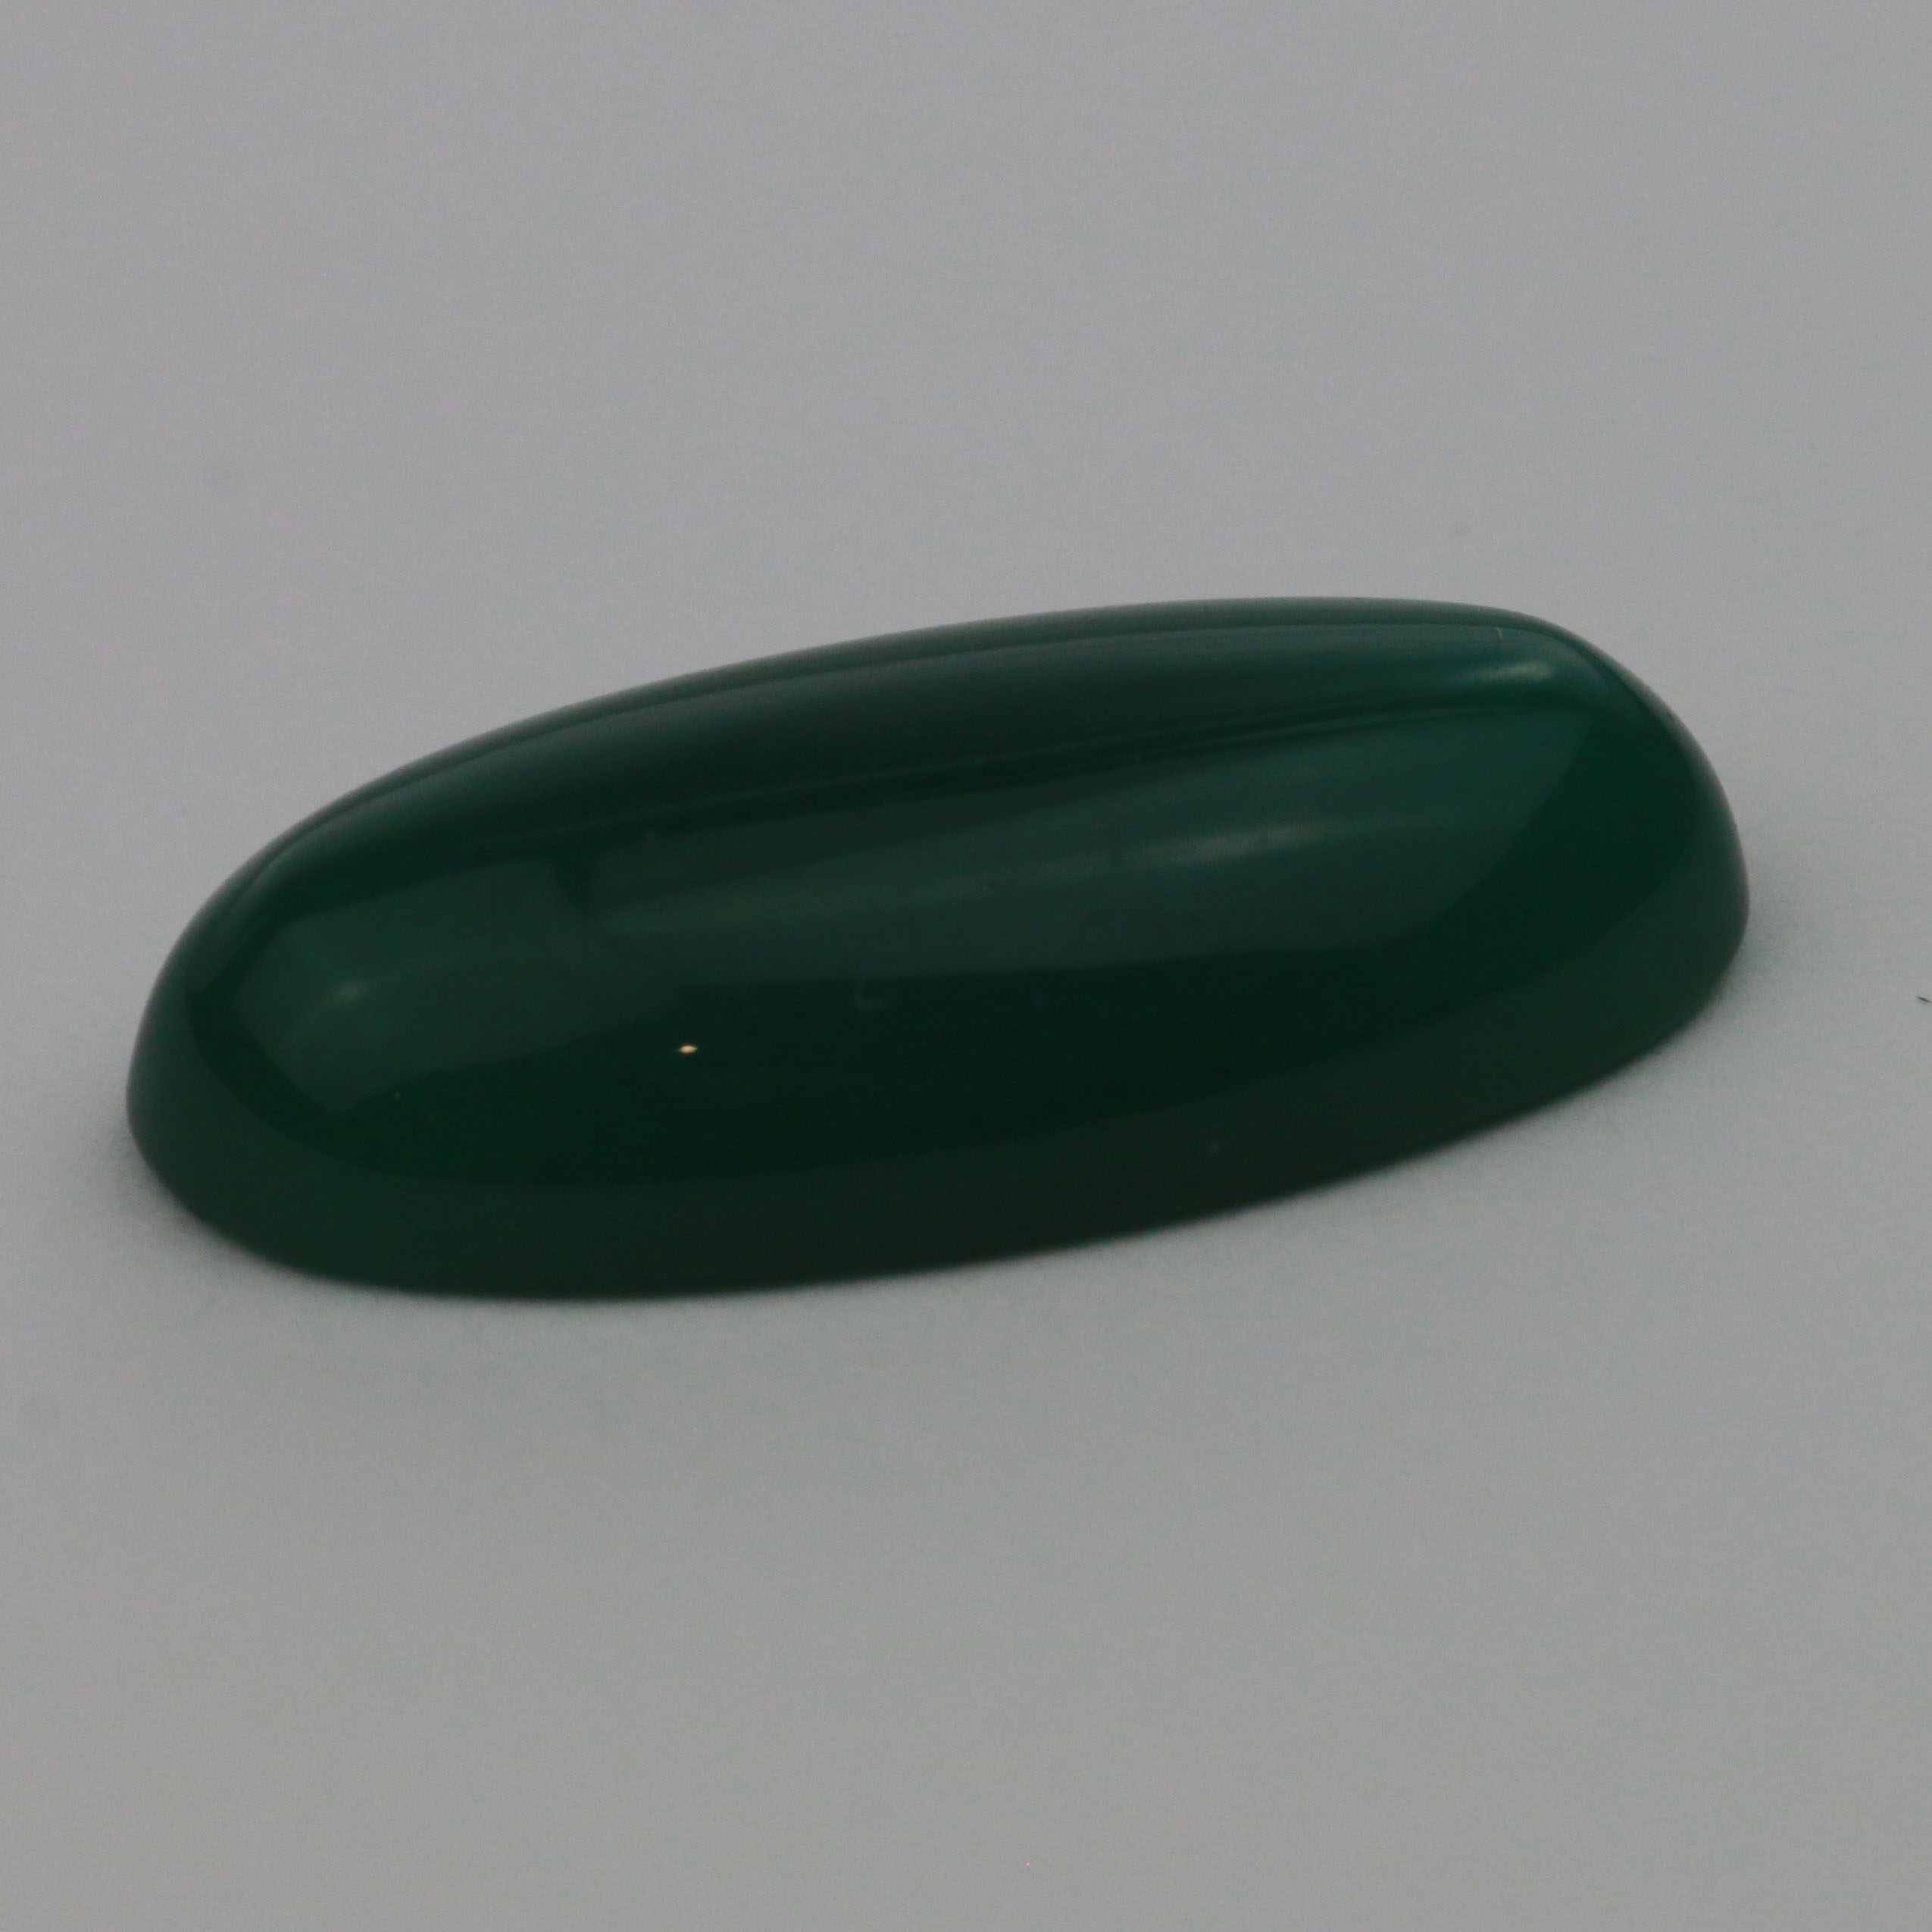 20X10 OVAL CABOCHON GREEN AGATE